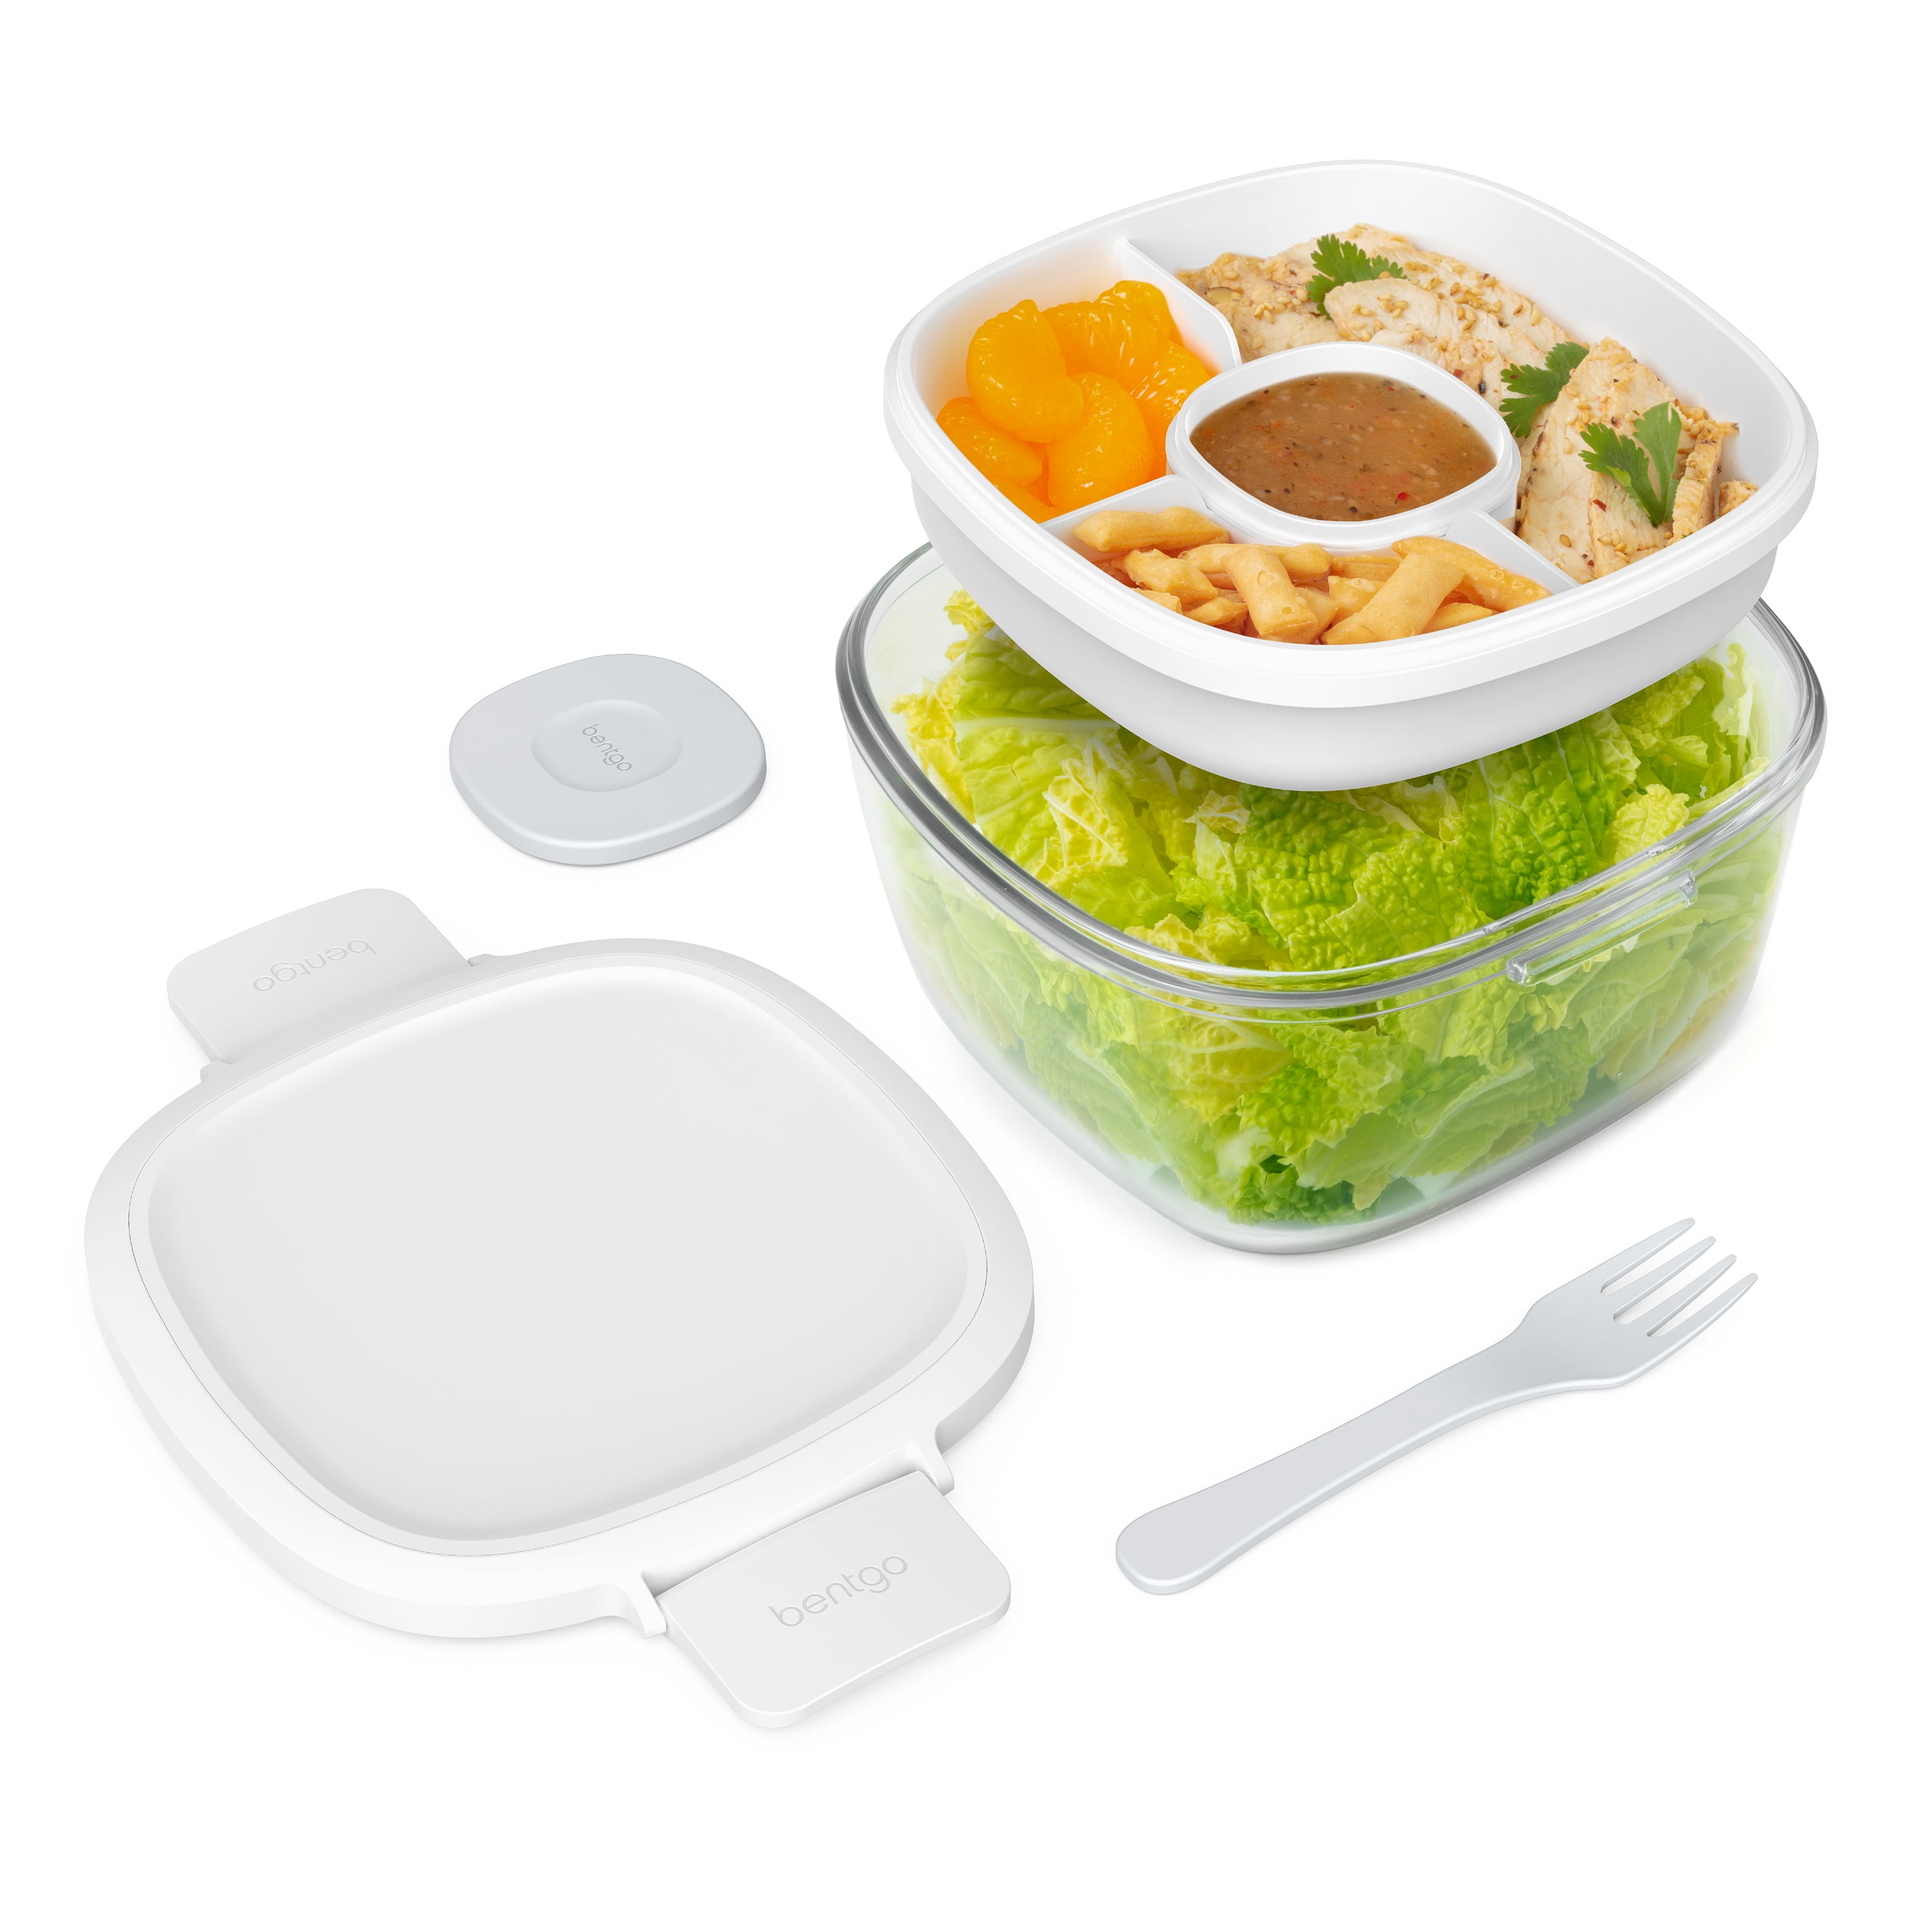 BENTGO On-The-Go Salad Container 54 oz. - BLUSH MARBLE - New Sealed 12@14B